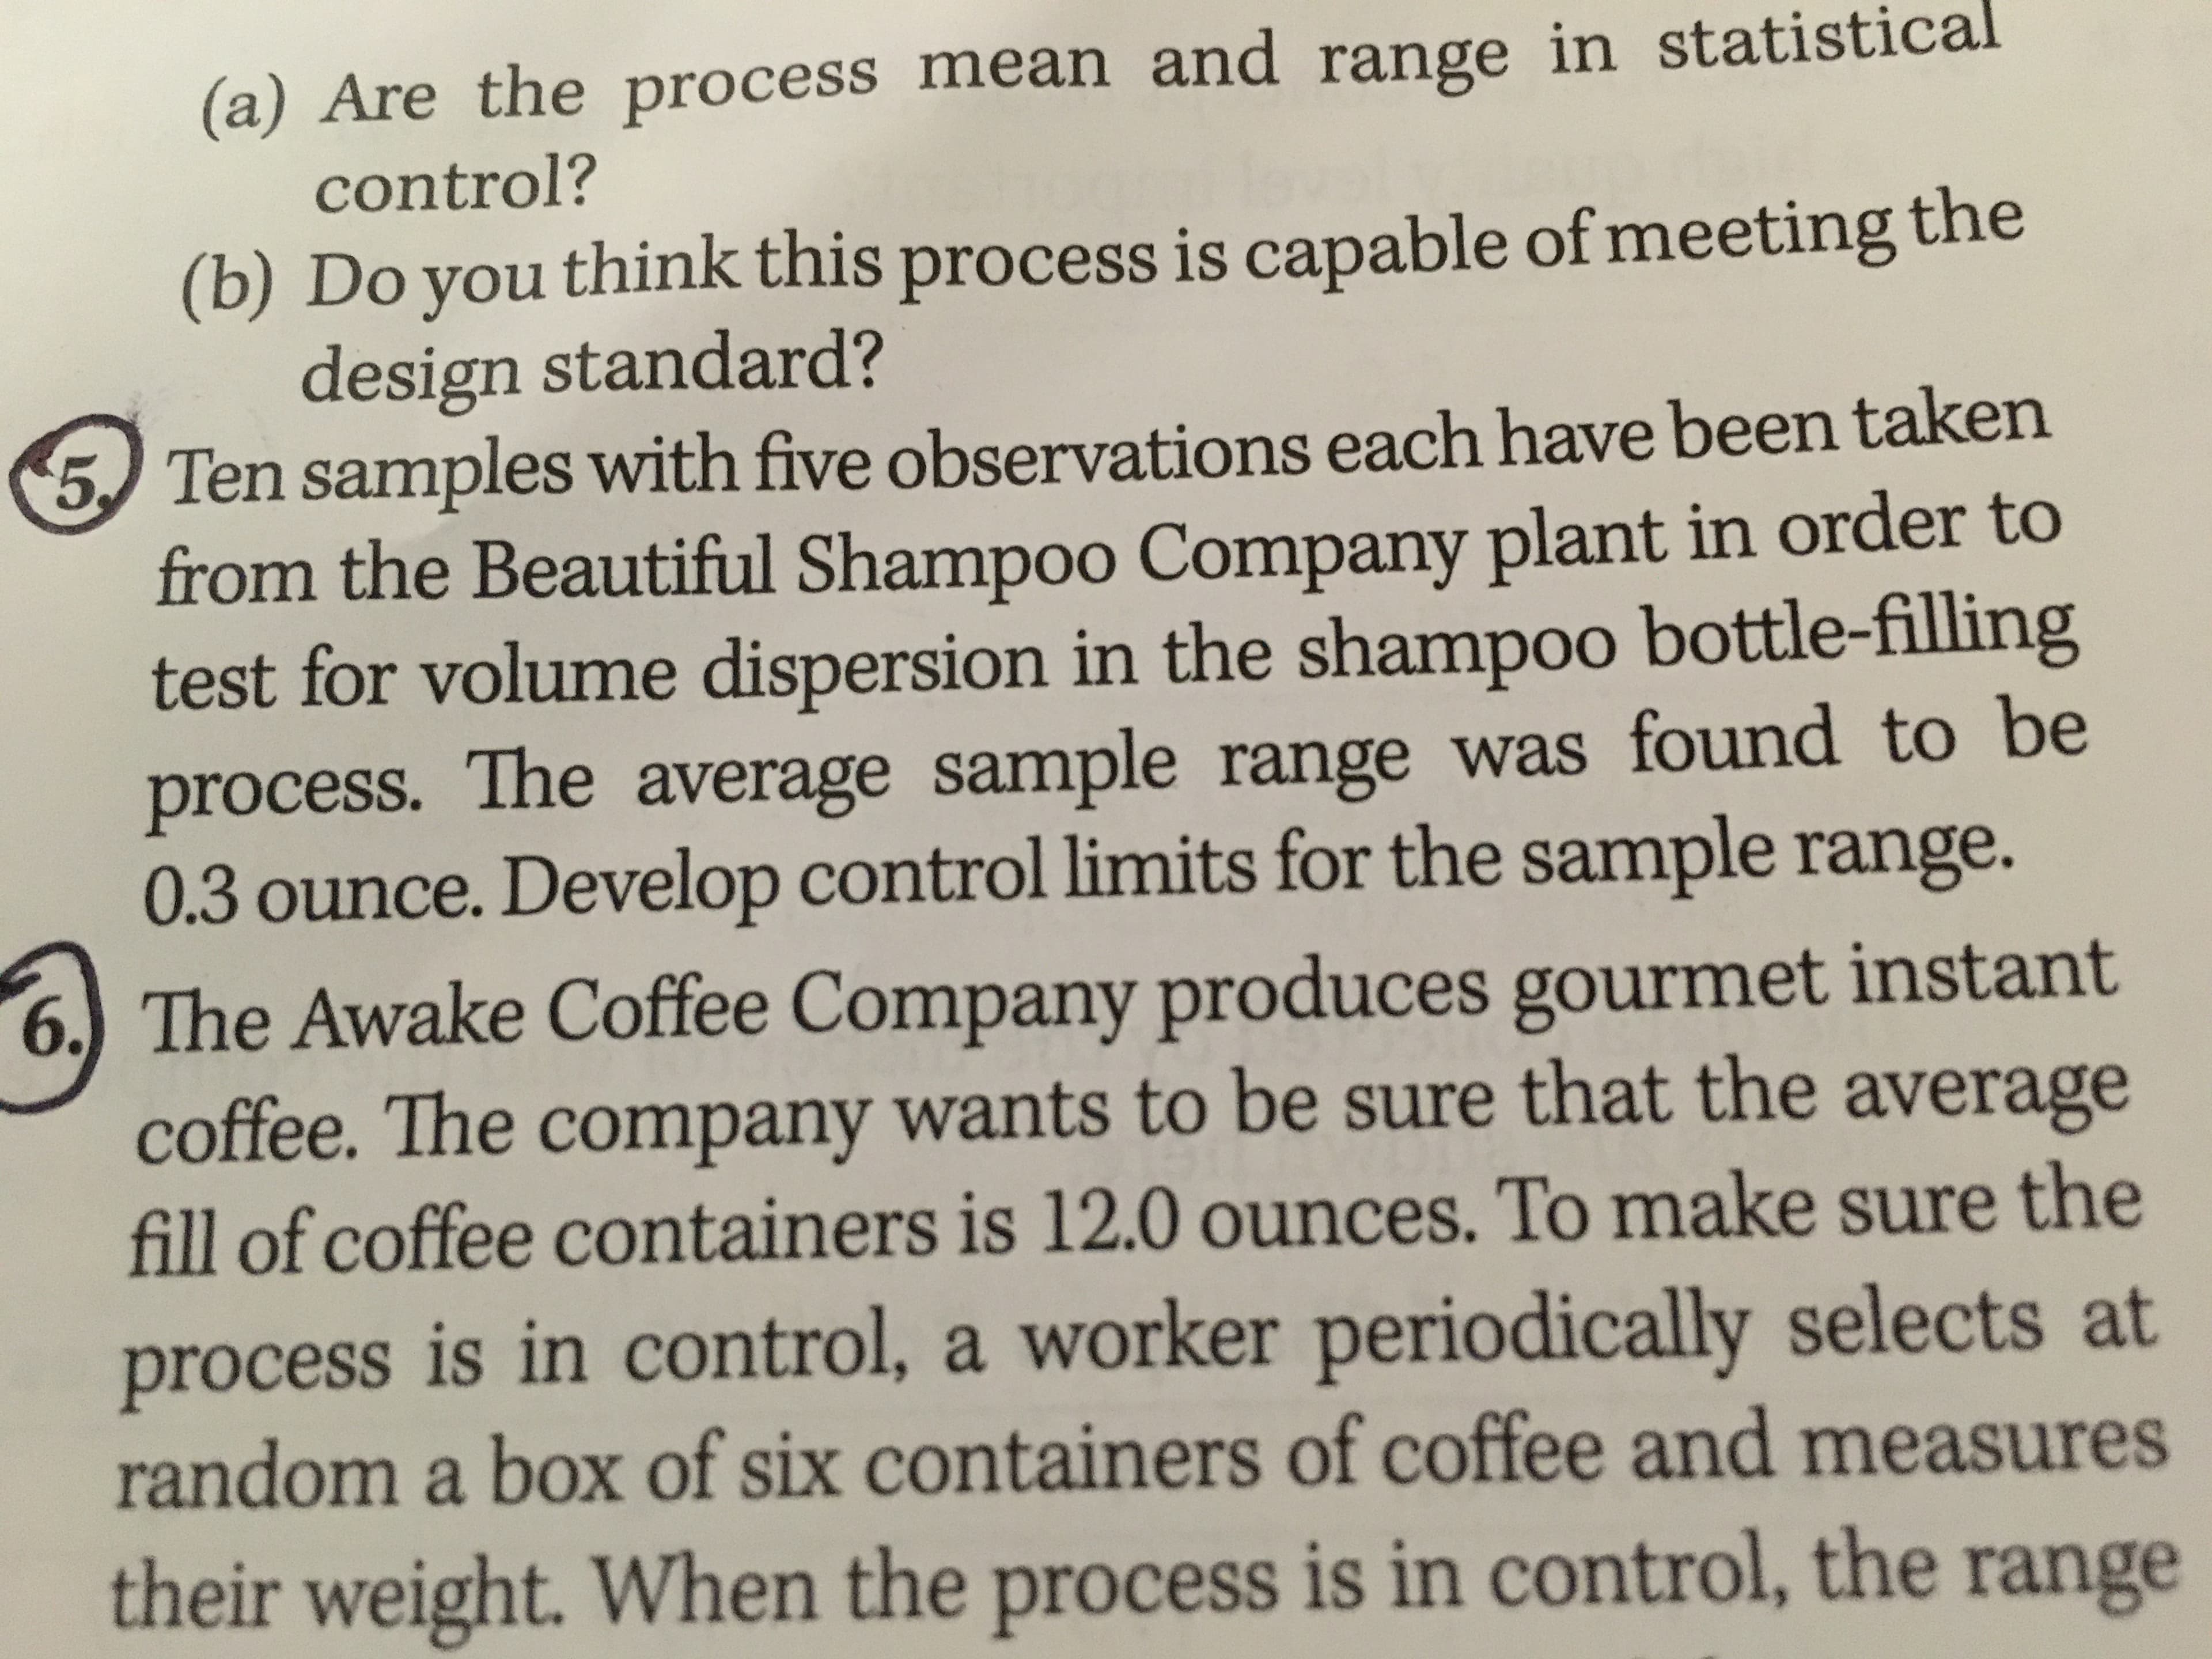 (a) Are the process mean and range in statistical
control?
(b) Do you think this process is capable of meeting the
design standard?
5 Ten samples with five observations each have been taken
from the Beautiful Shampoo Company plant in order to
test for volume dispersion in the shampoo bottle-filling
process. The average sample range was found to be
0.3 ounce. Develop control limits for the sample range.
6. The Awake Coffee Company produces gourmet instant
coffee. The company wants to be sure that the average
fill of coffee containers is 12.0 ounces. To make sure the
process is in control, a worker periodically selects at
random a box of six containers of coffee and measures
their weight. When the process is in control, the range
